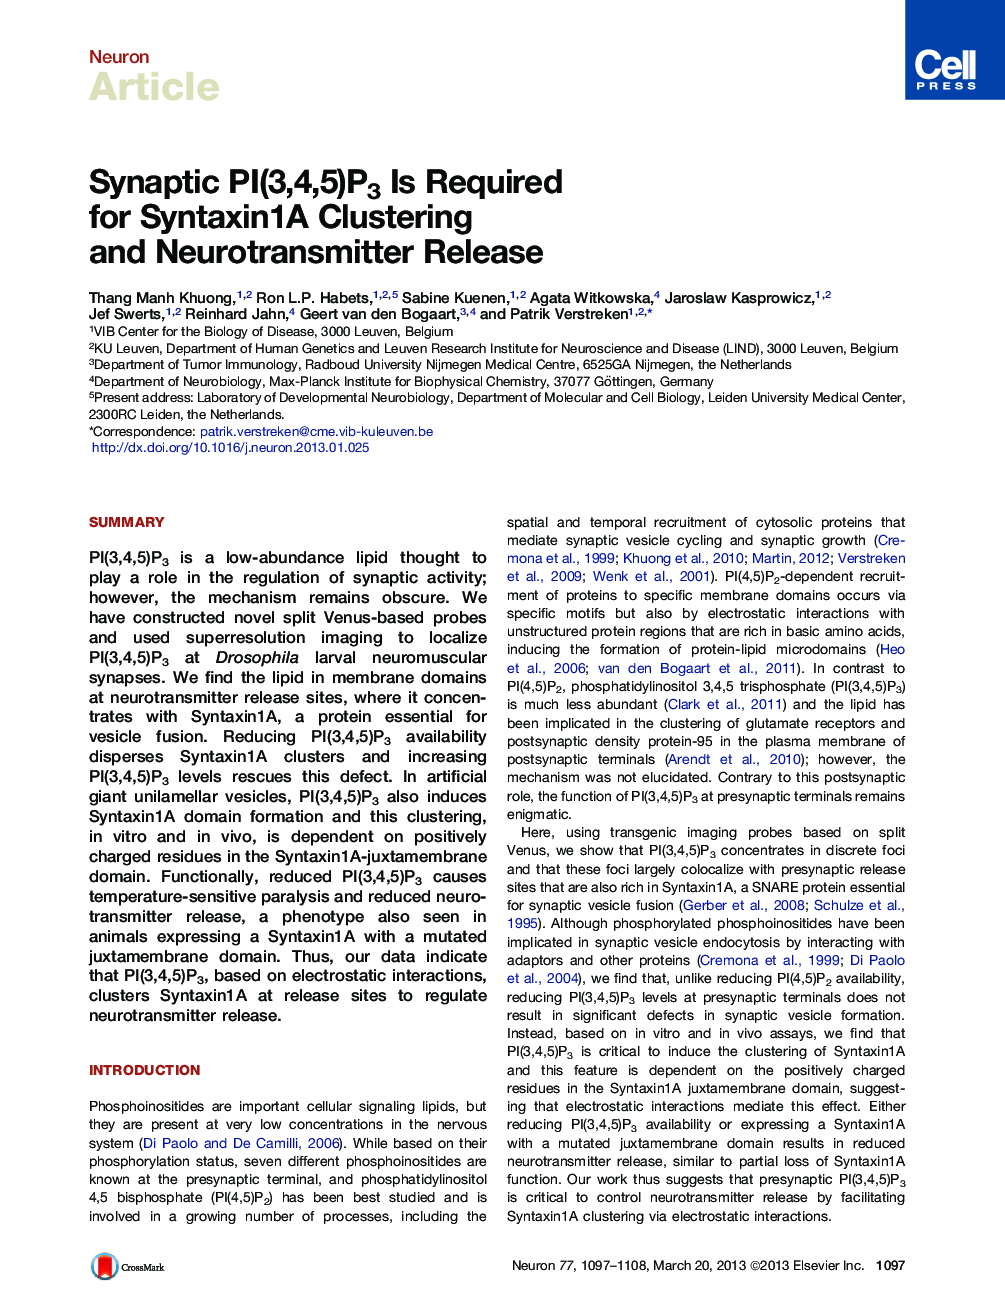 Synaptic PI(3,4,5)P3 Is Required for Syntaxin1A Clustering and Neurotransmitter Release